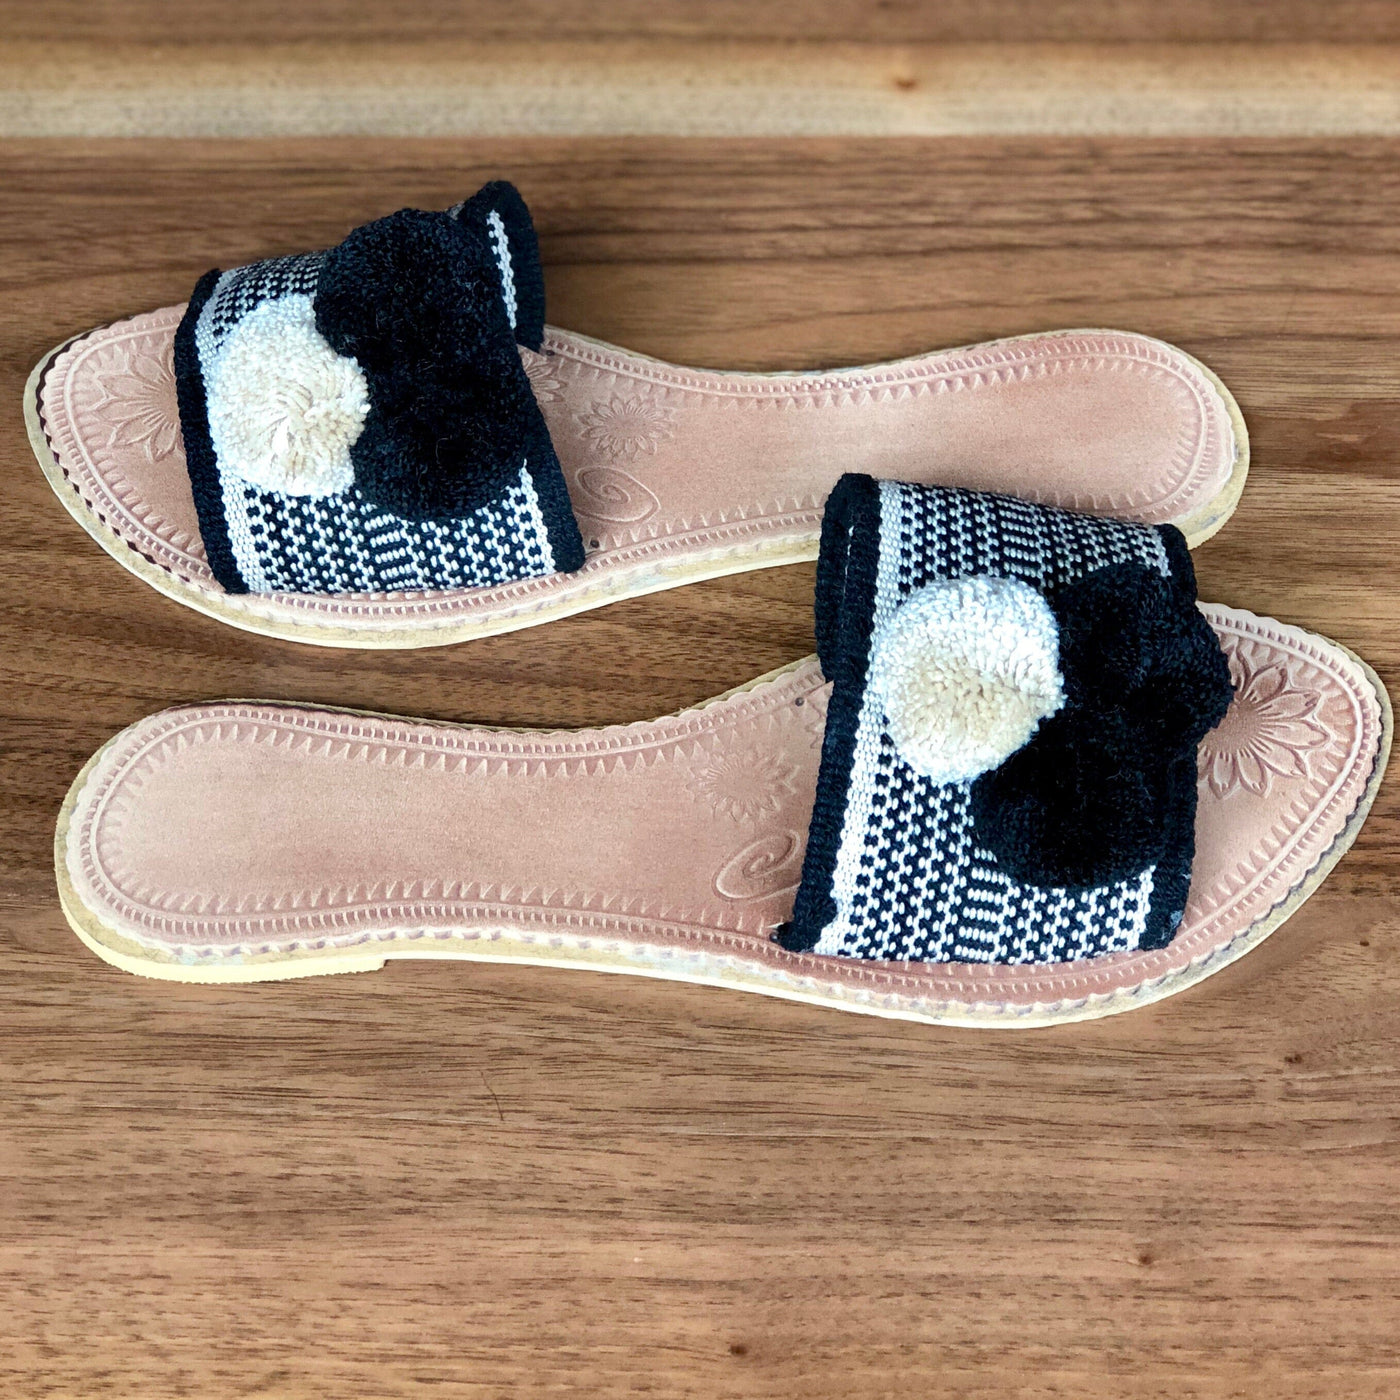 Black and white Pom pom Sandals Flat | Cute Summer sandals for women